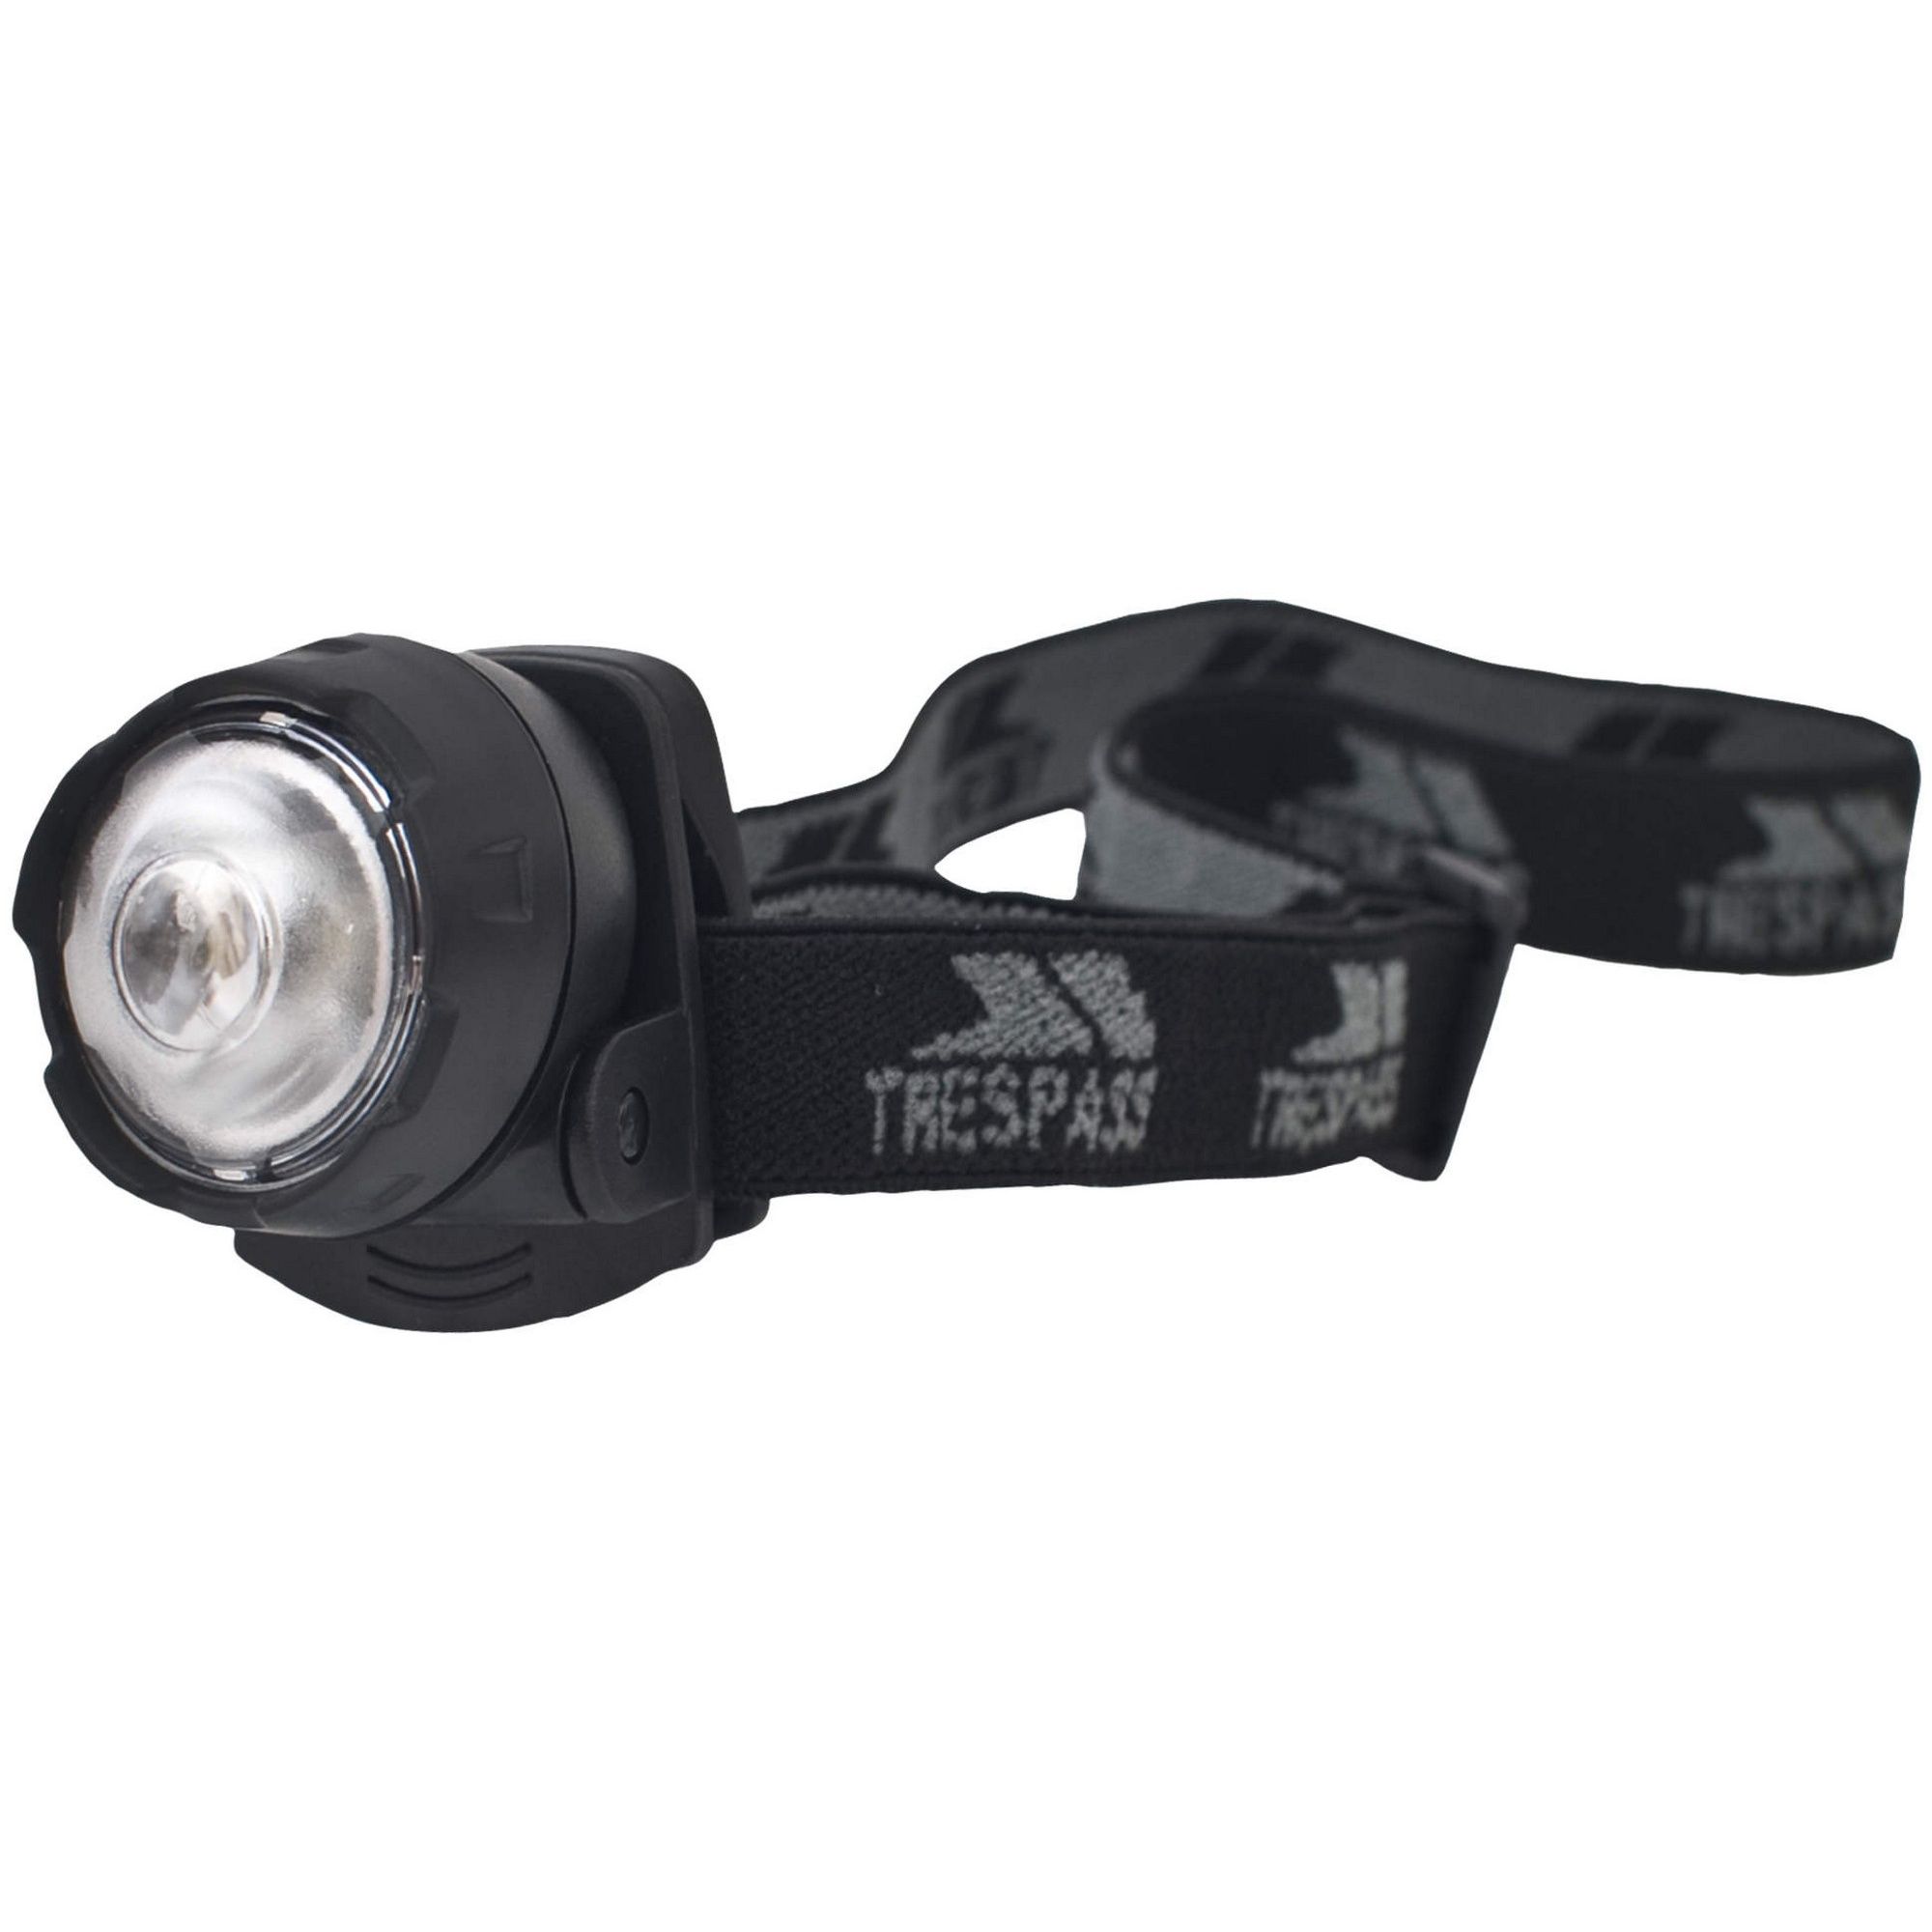 Material: synthetic. Ultra Light LED. Head Torch. Batteries Included. Requires 2 x CR2016 Batteries.